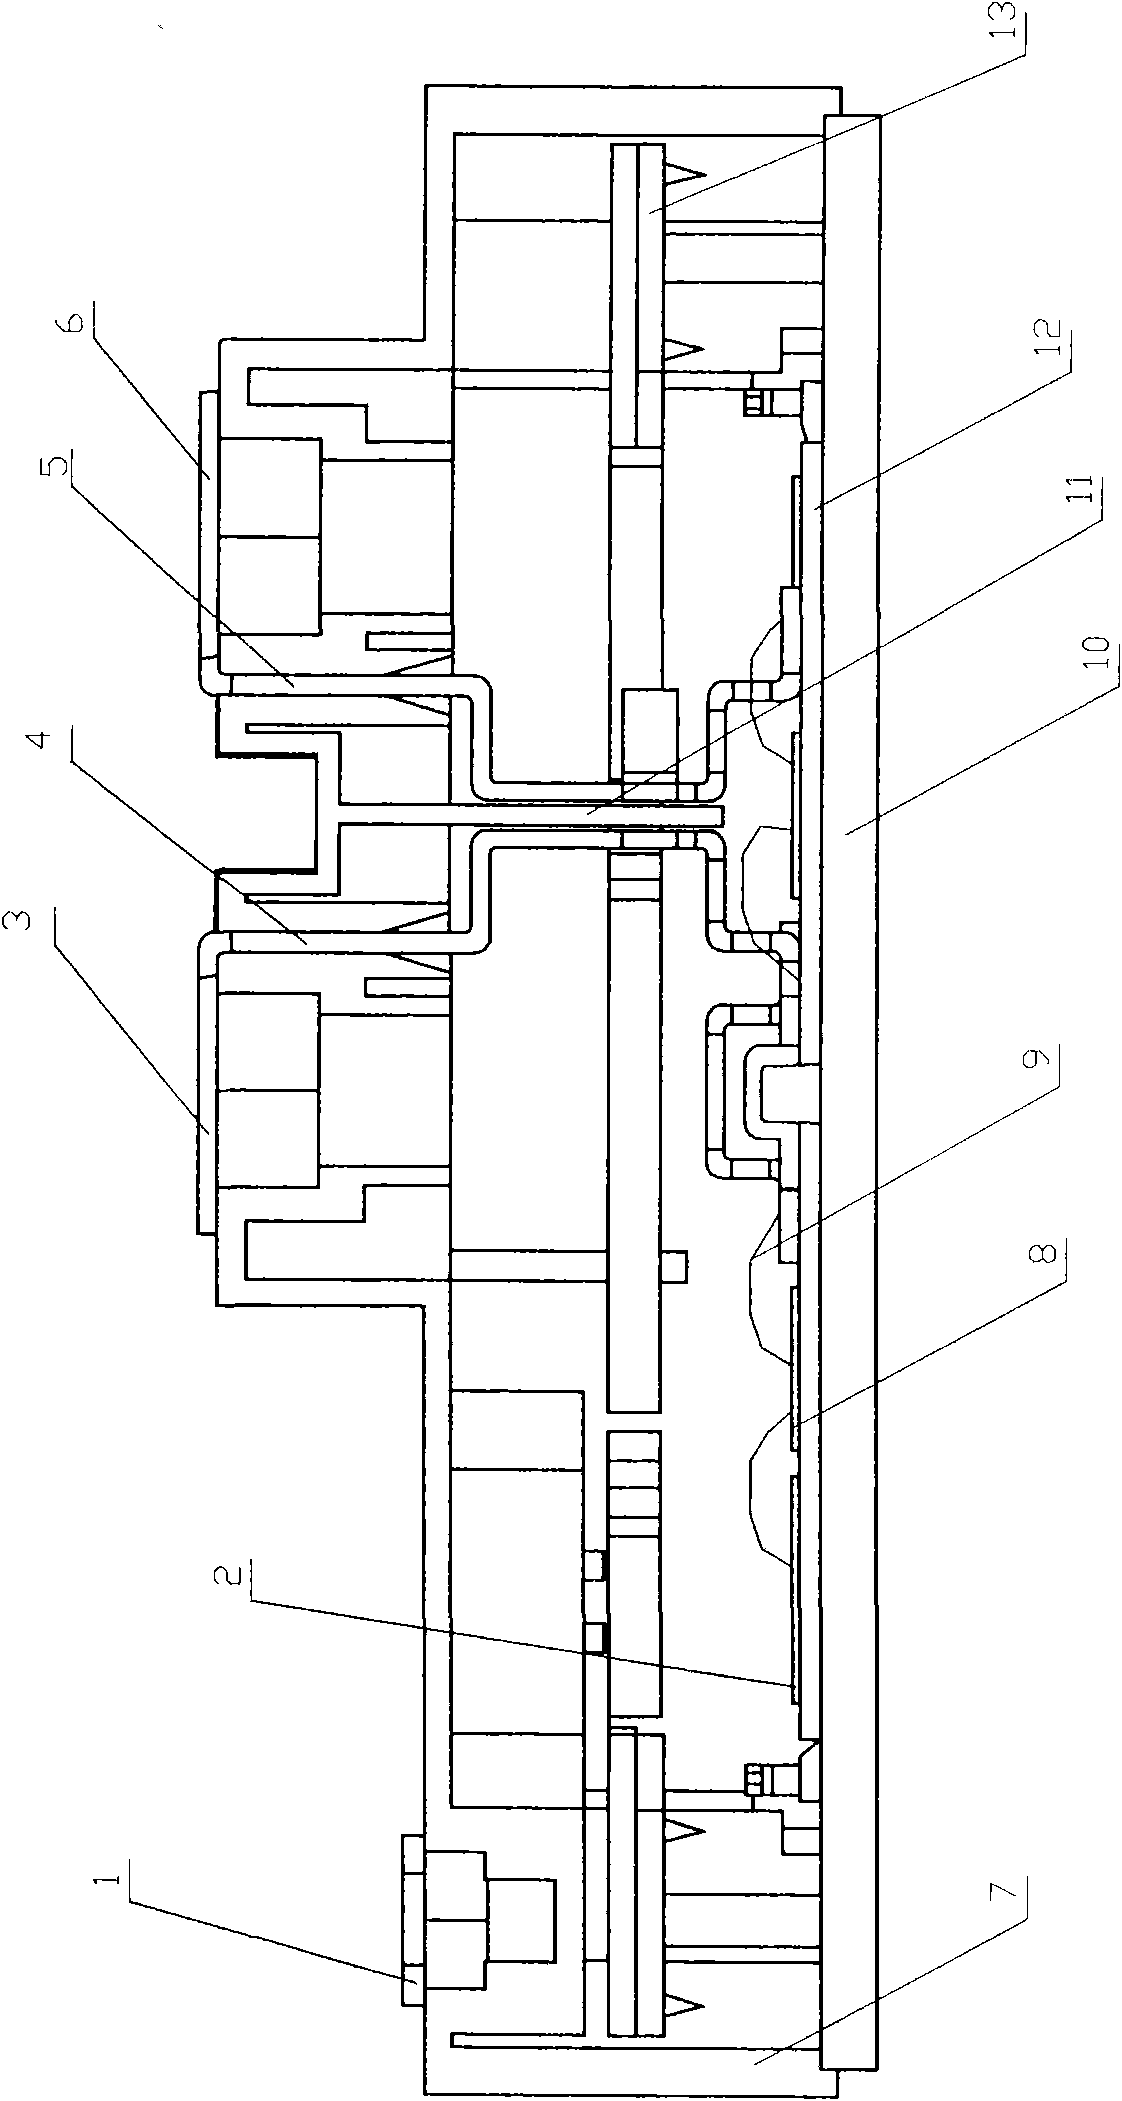 Power module with lower stray inductance